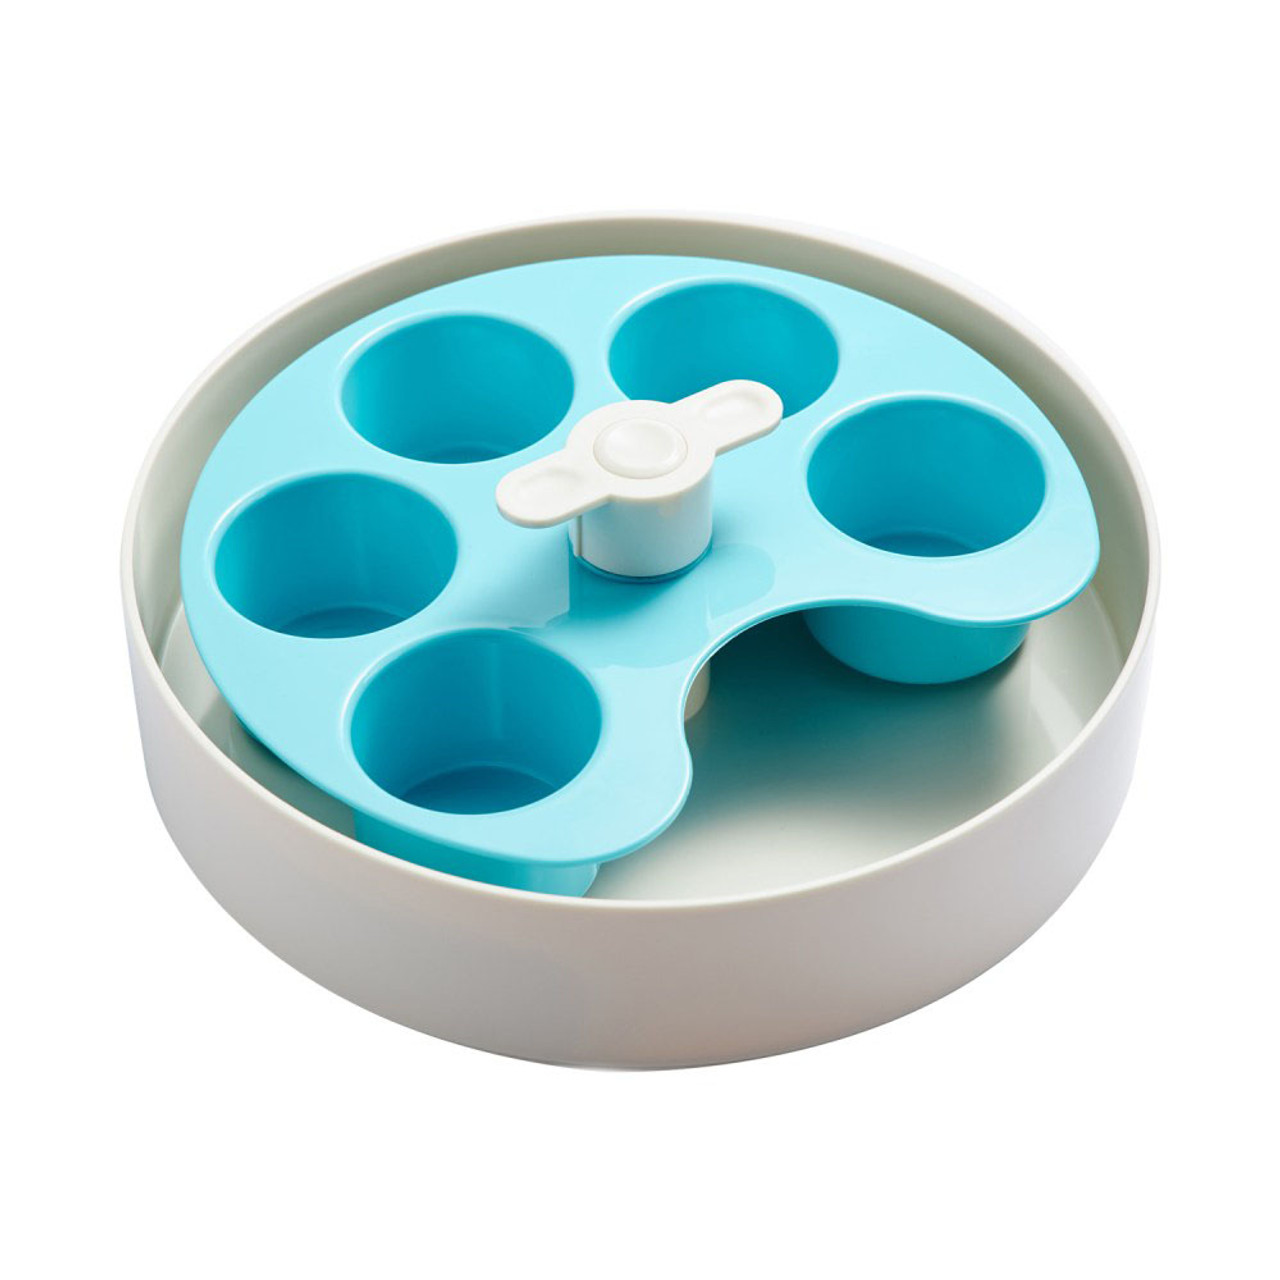 PetDreamHouse SPIN Interactive Palette Puzzle Bowl Dog Toy